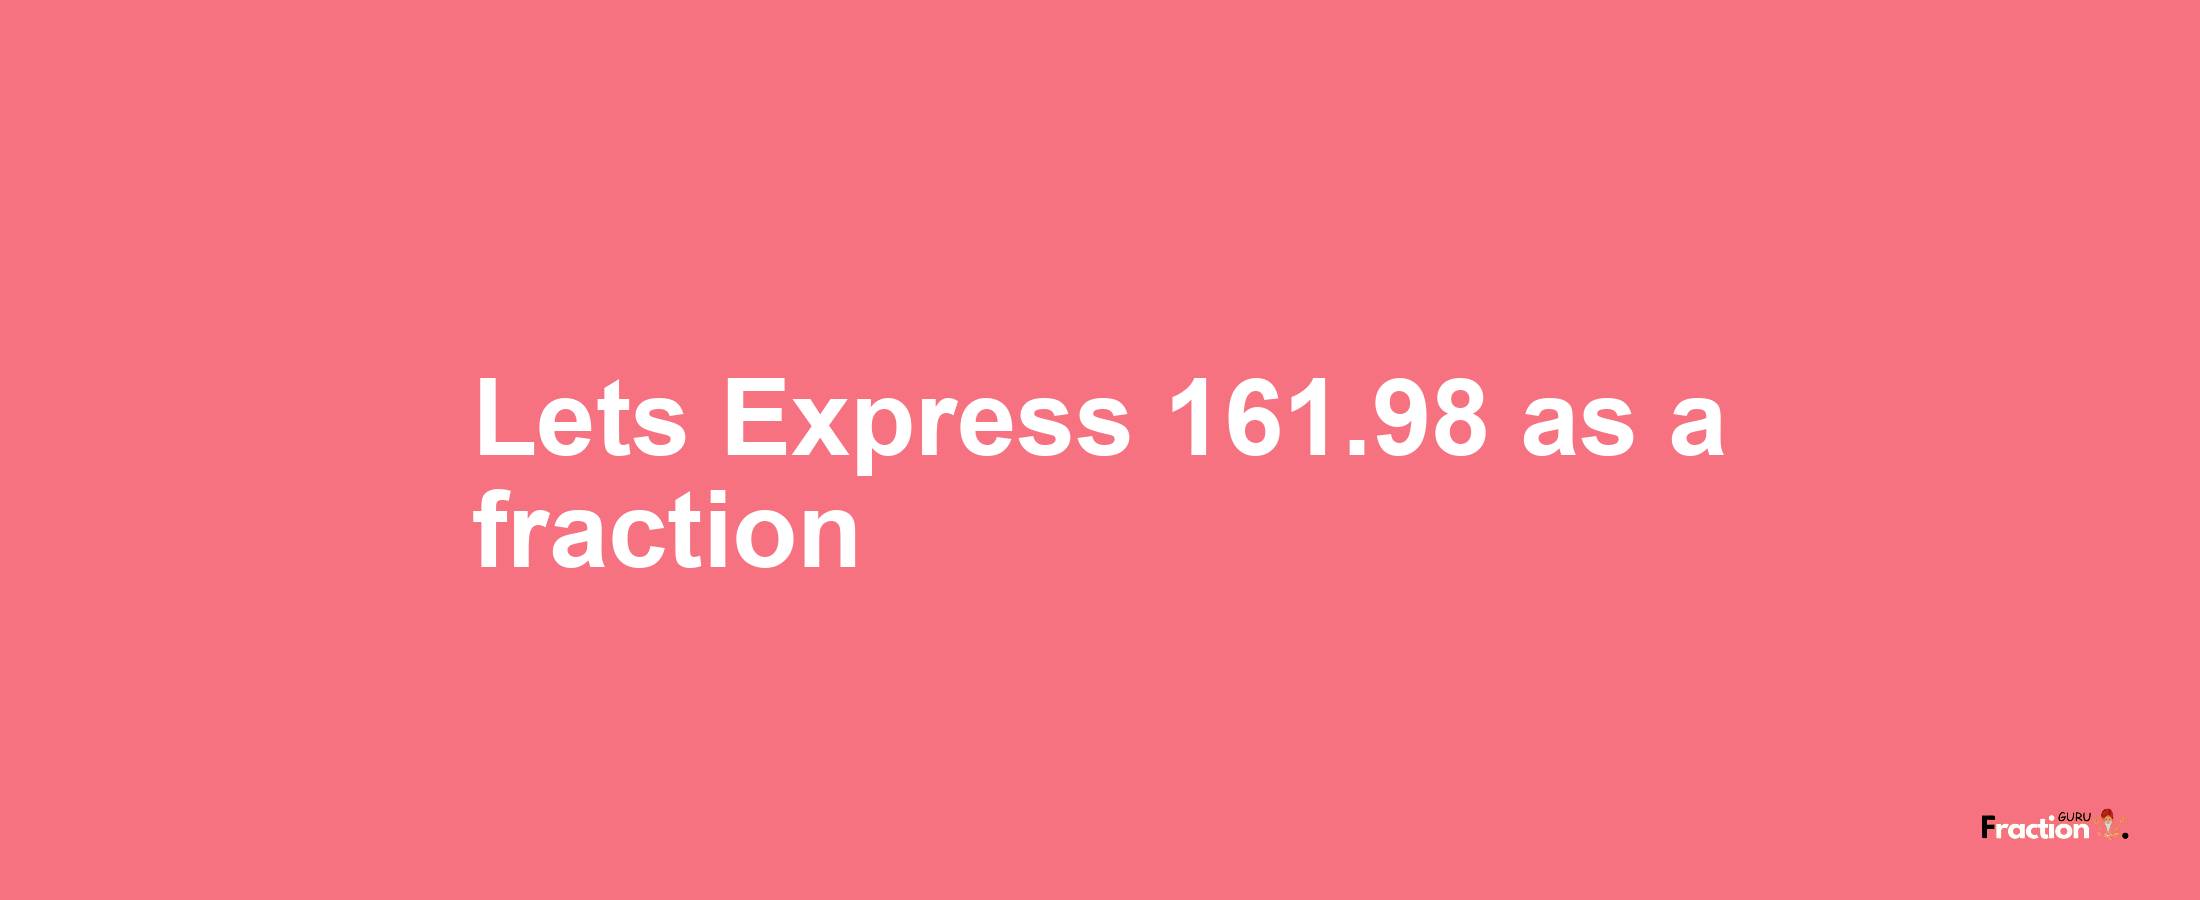 Lets Express 161.98 as afraction